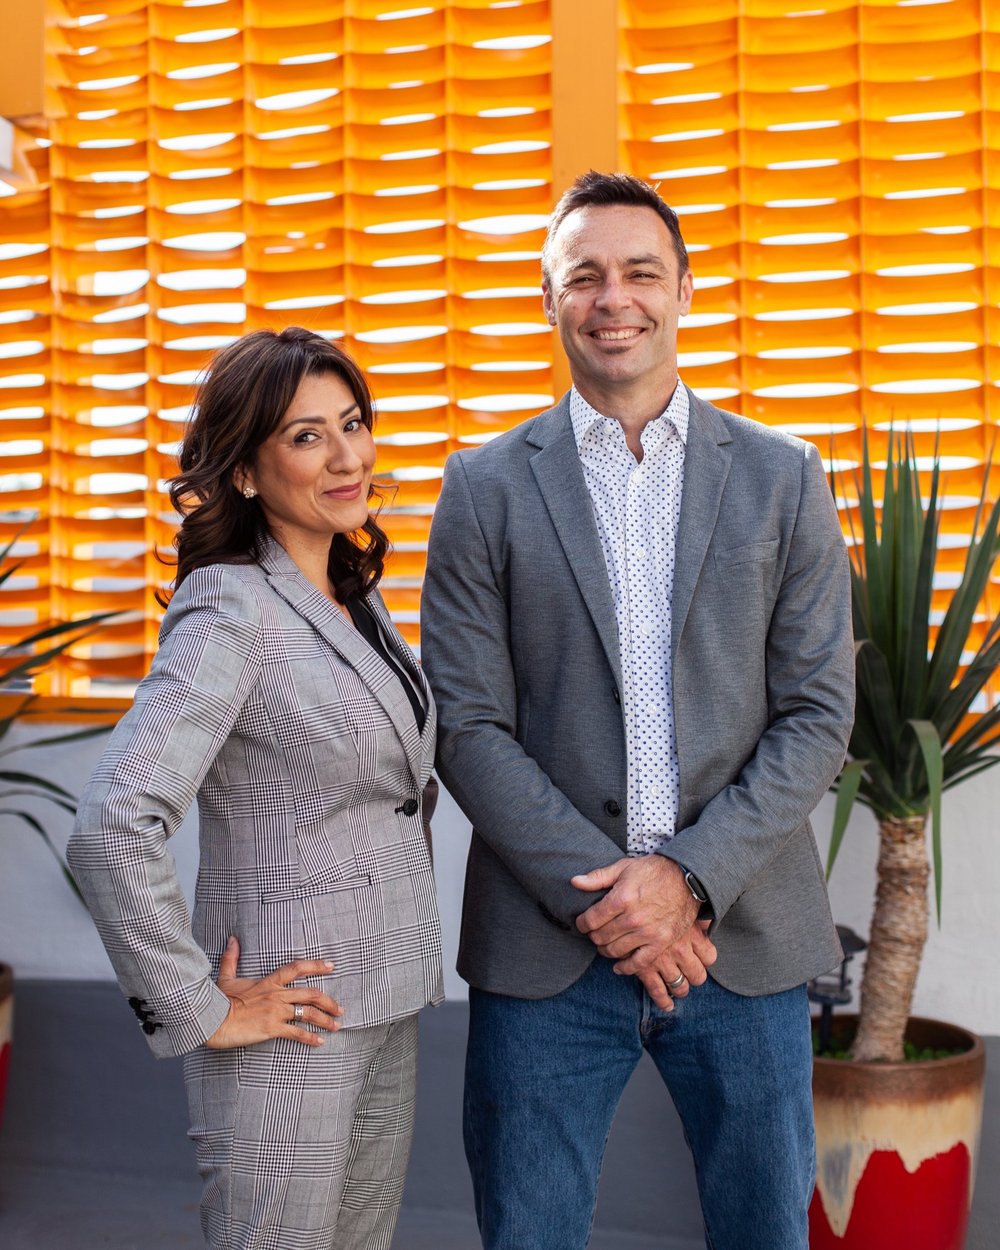  Luz &amp; Sacha of New World Mortgage during a team portrait session. 